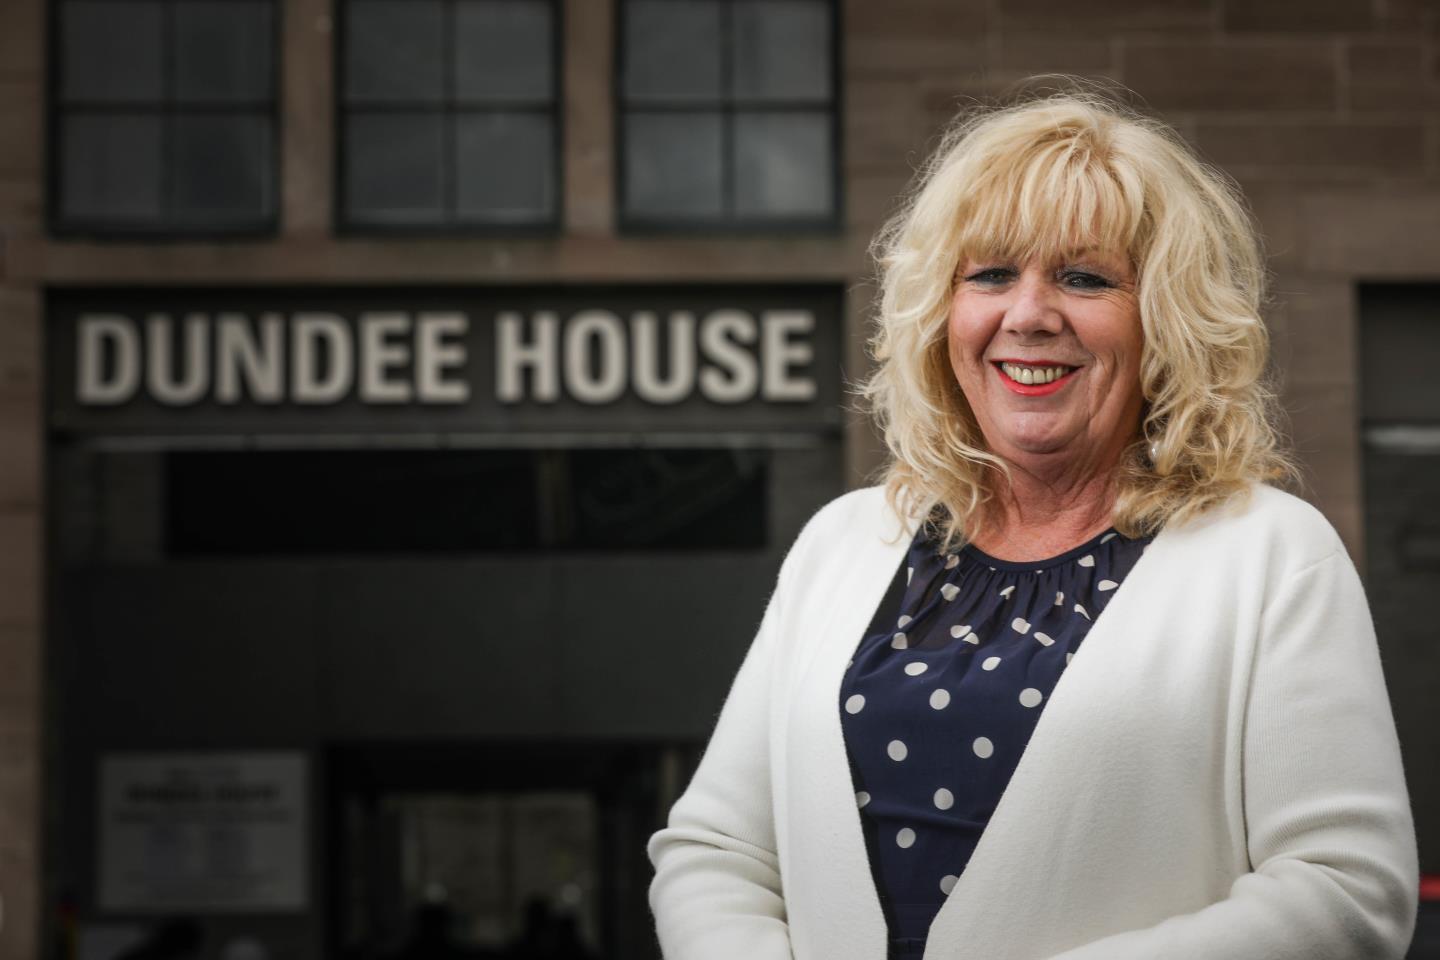 chief education officer at Dundee City Council Audrey May